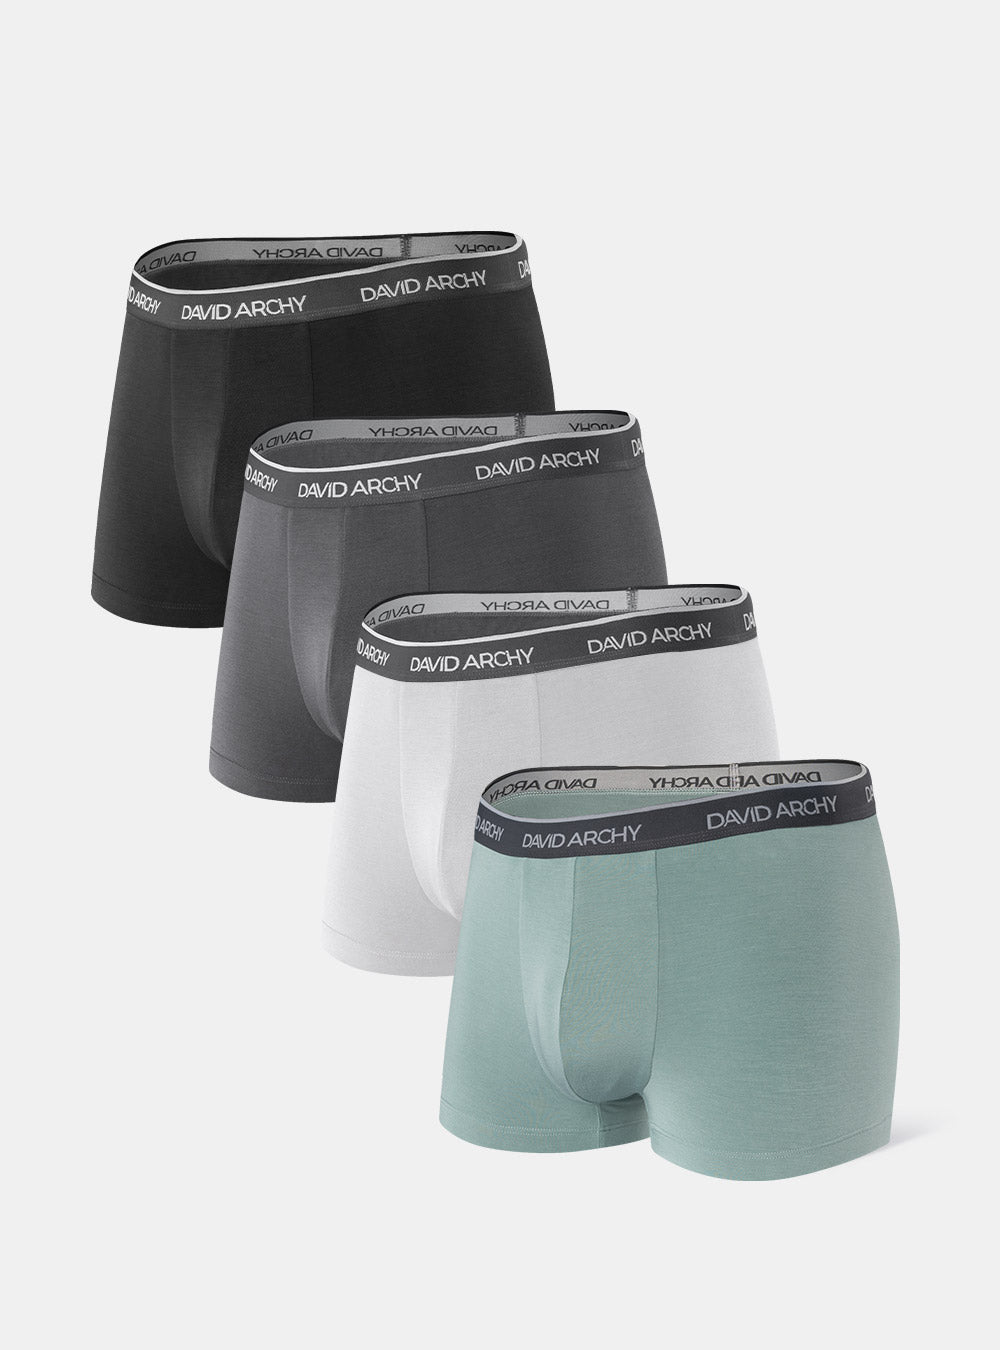 Men's Bamboo Viscose Organic Cotton Boxers Single Pack Bamboo Underwear  Silky Soft Breathable Boxer Shorts 